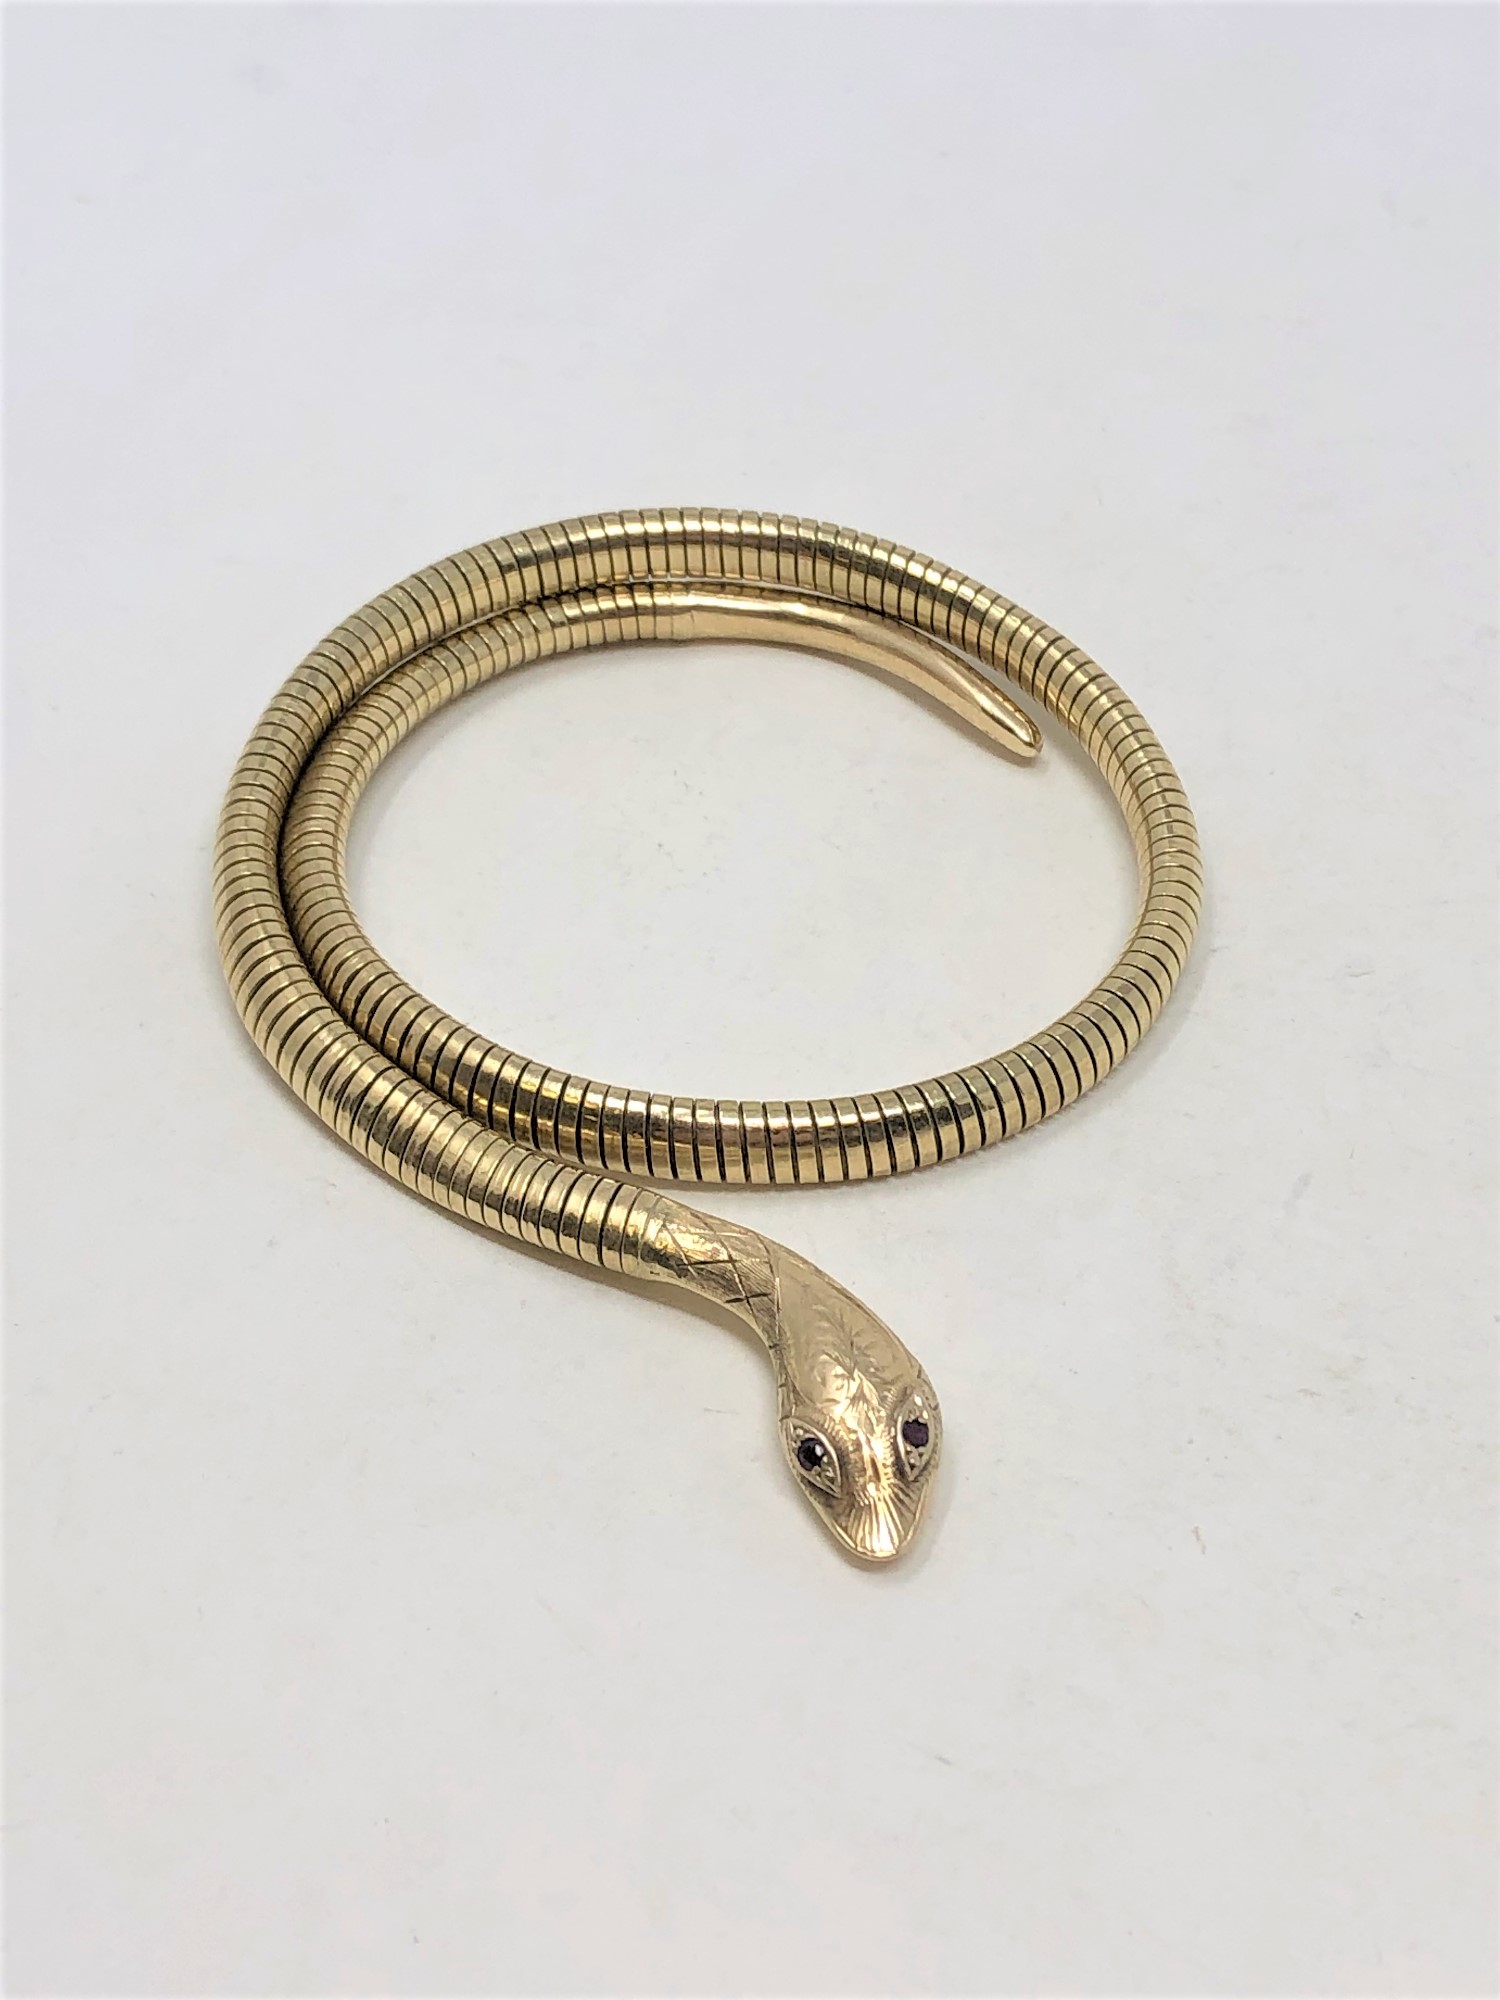 A 9ct gold and steel spring snake bracelet set with red eyes 29.6g gross.